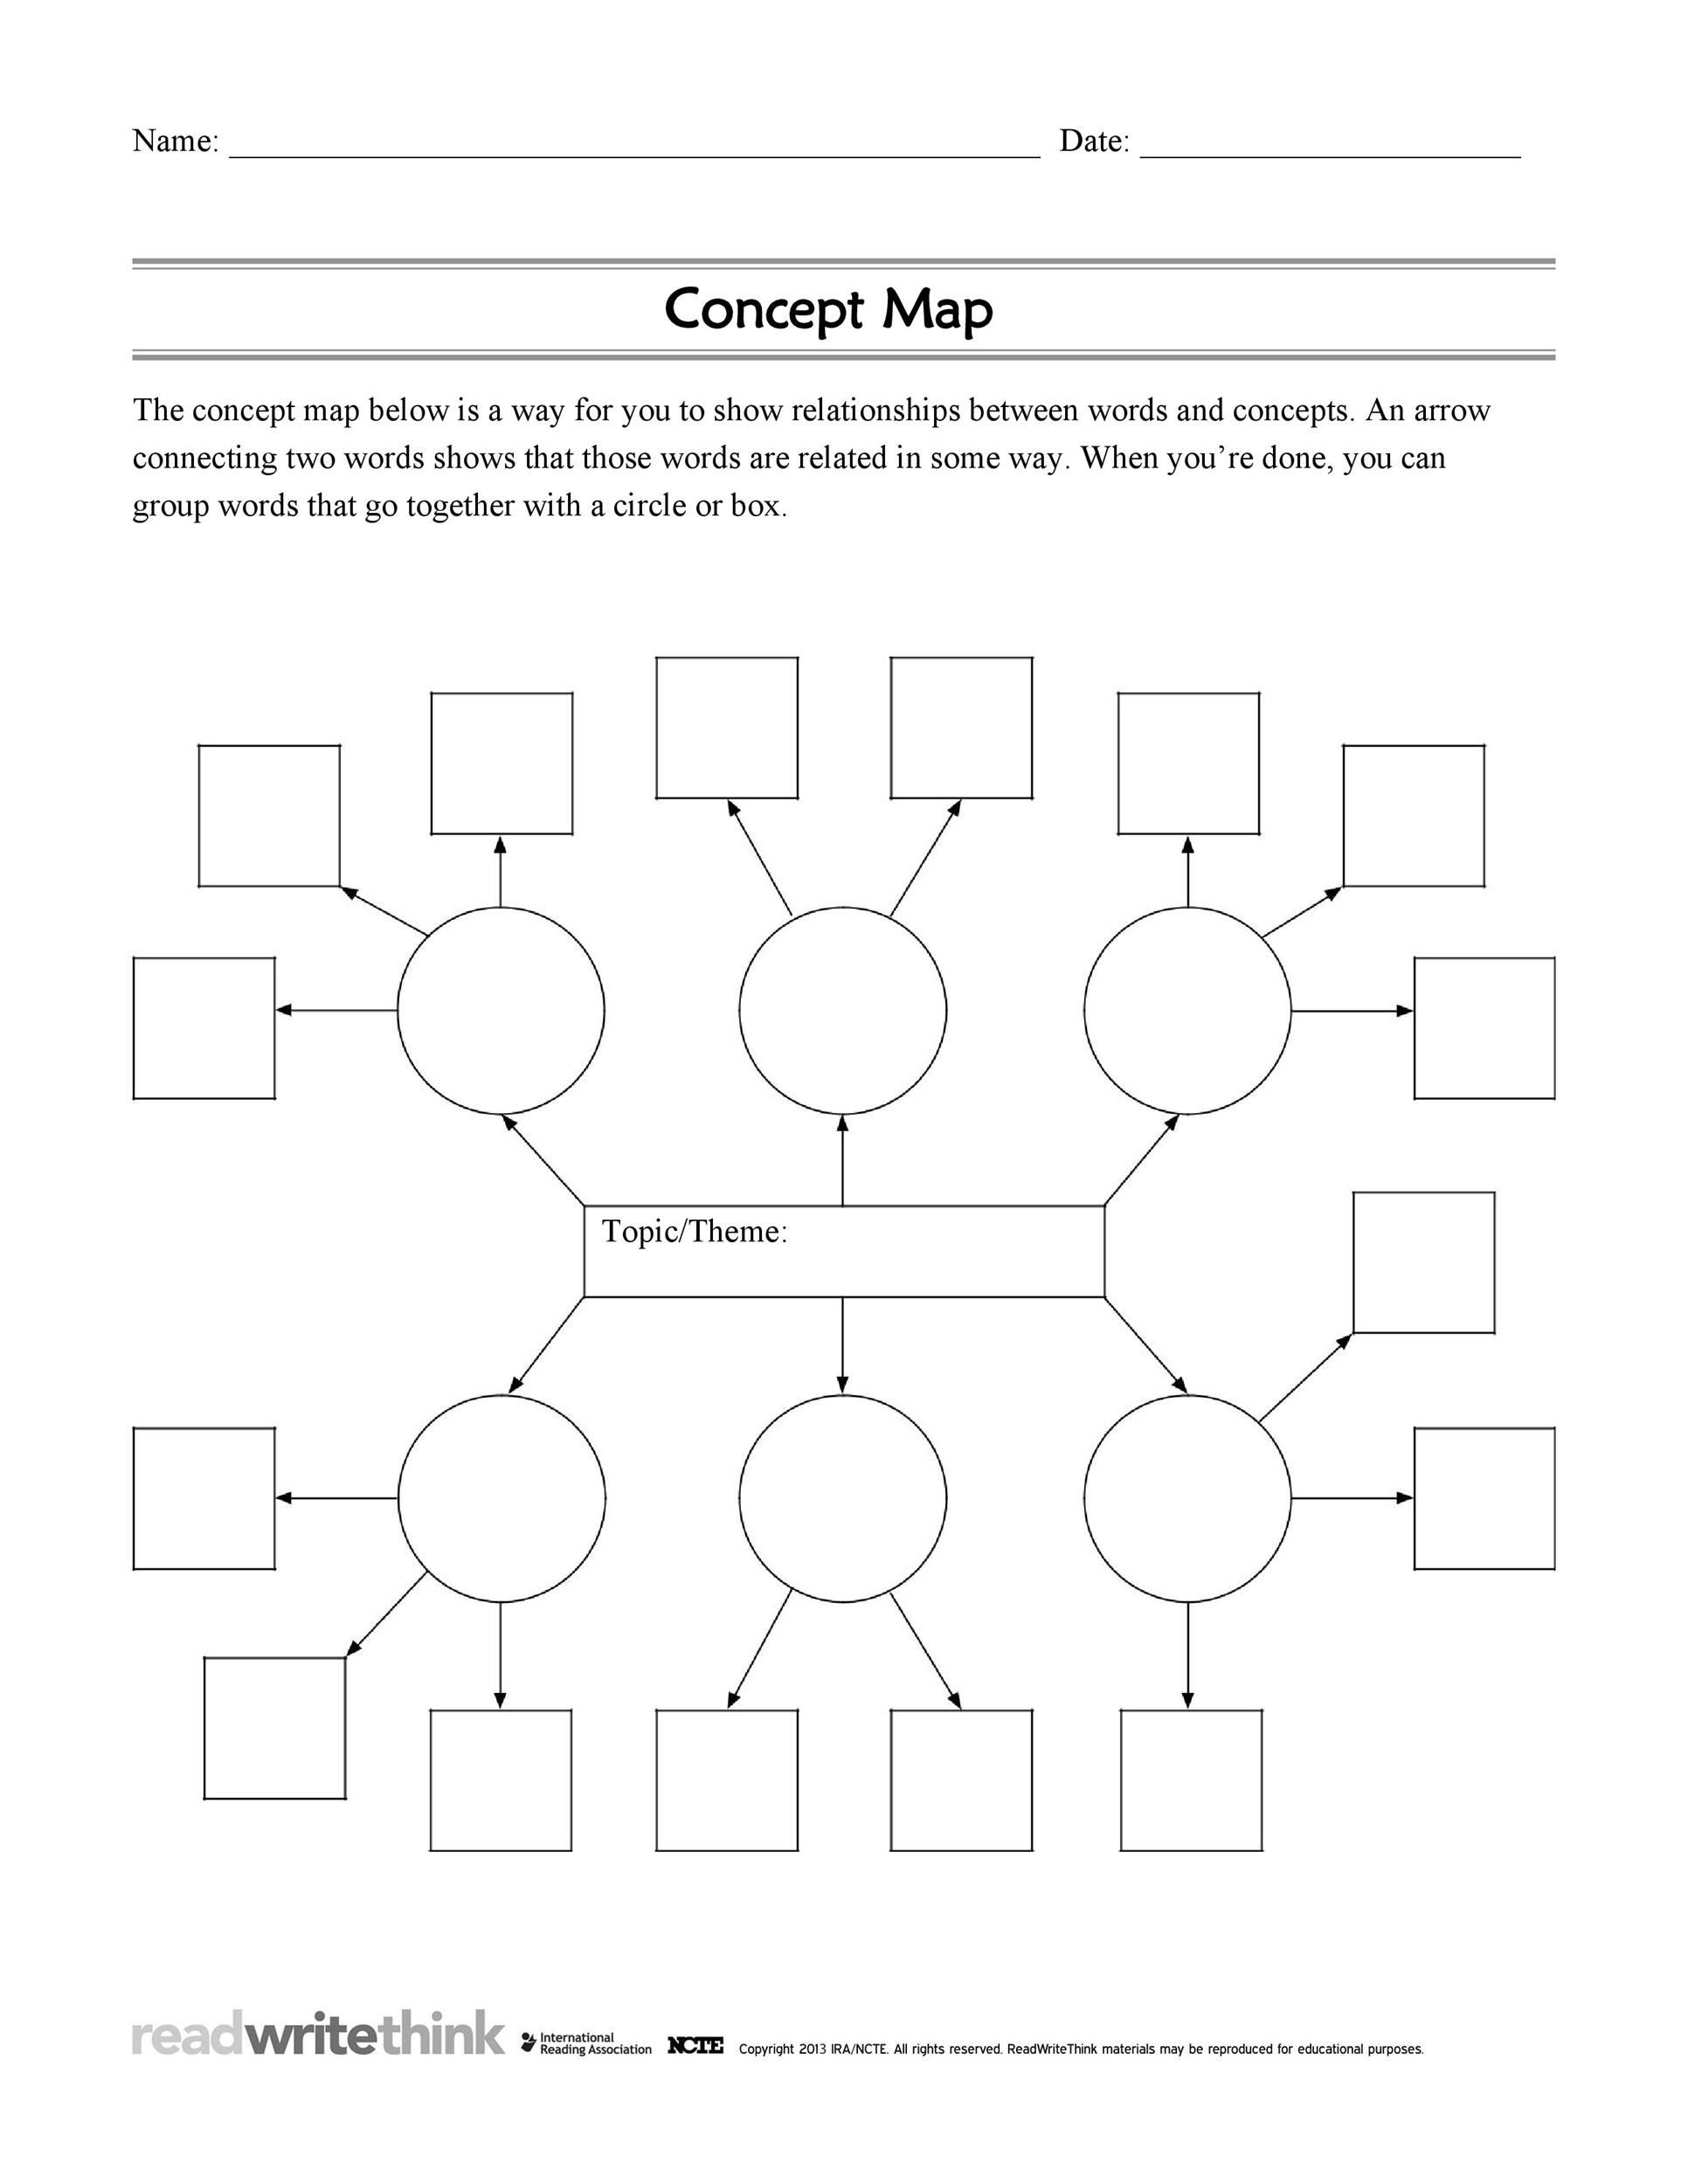 Free concept map template 19